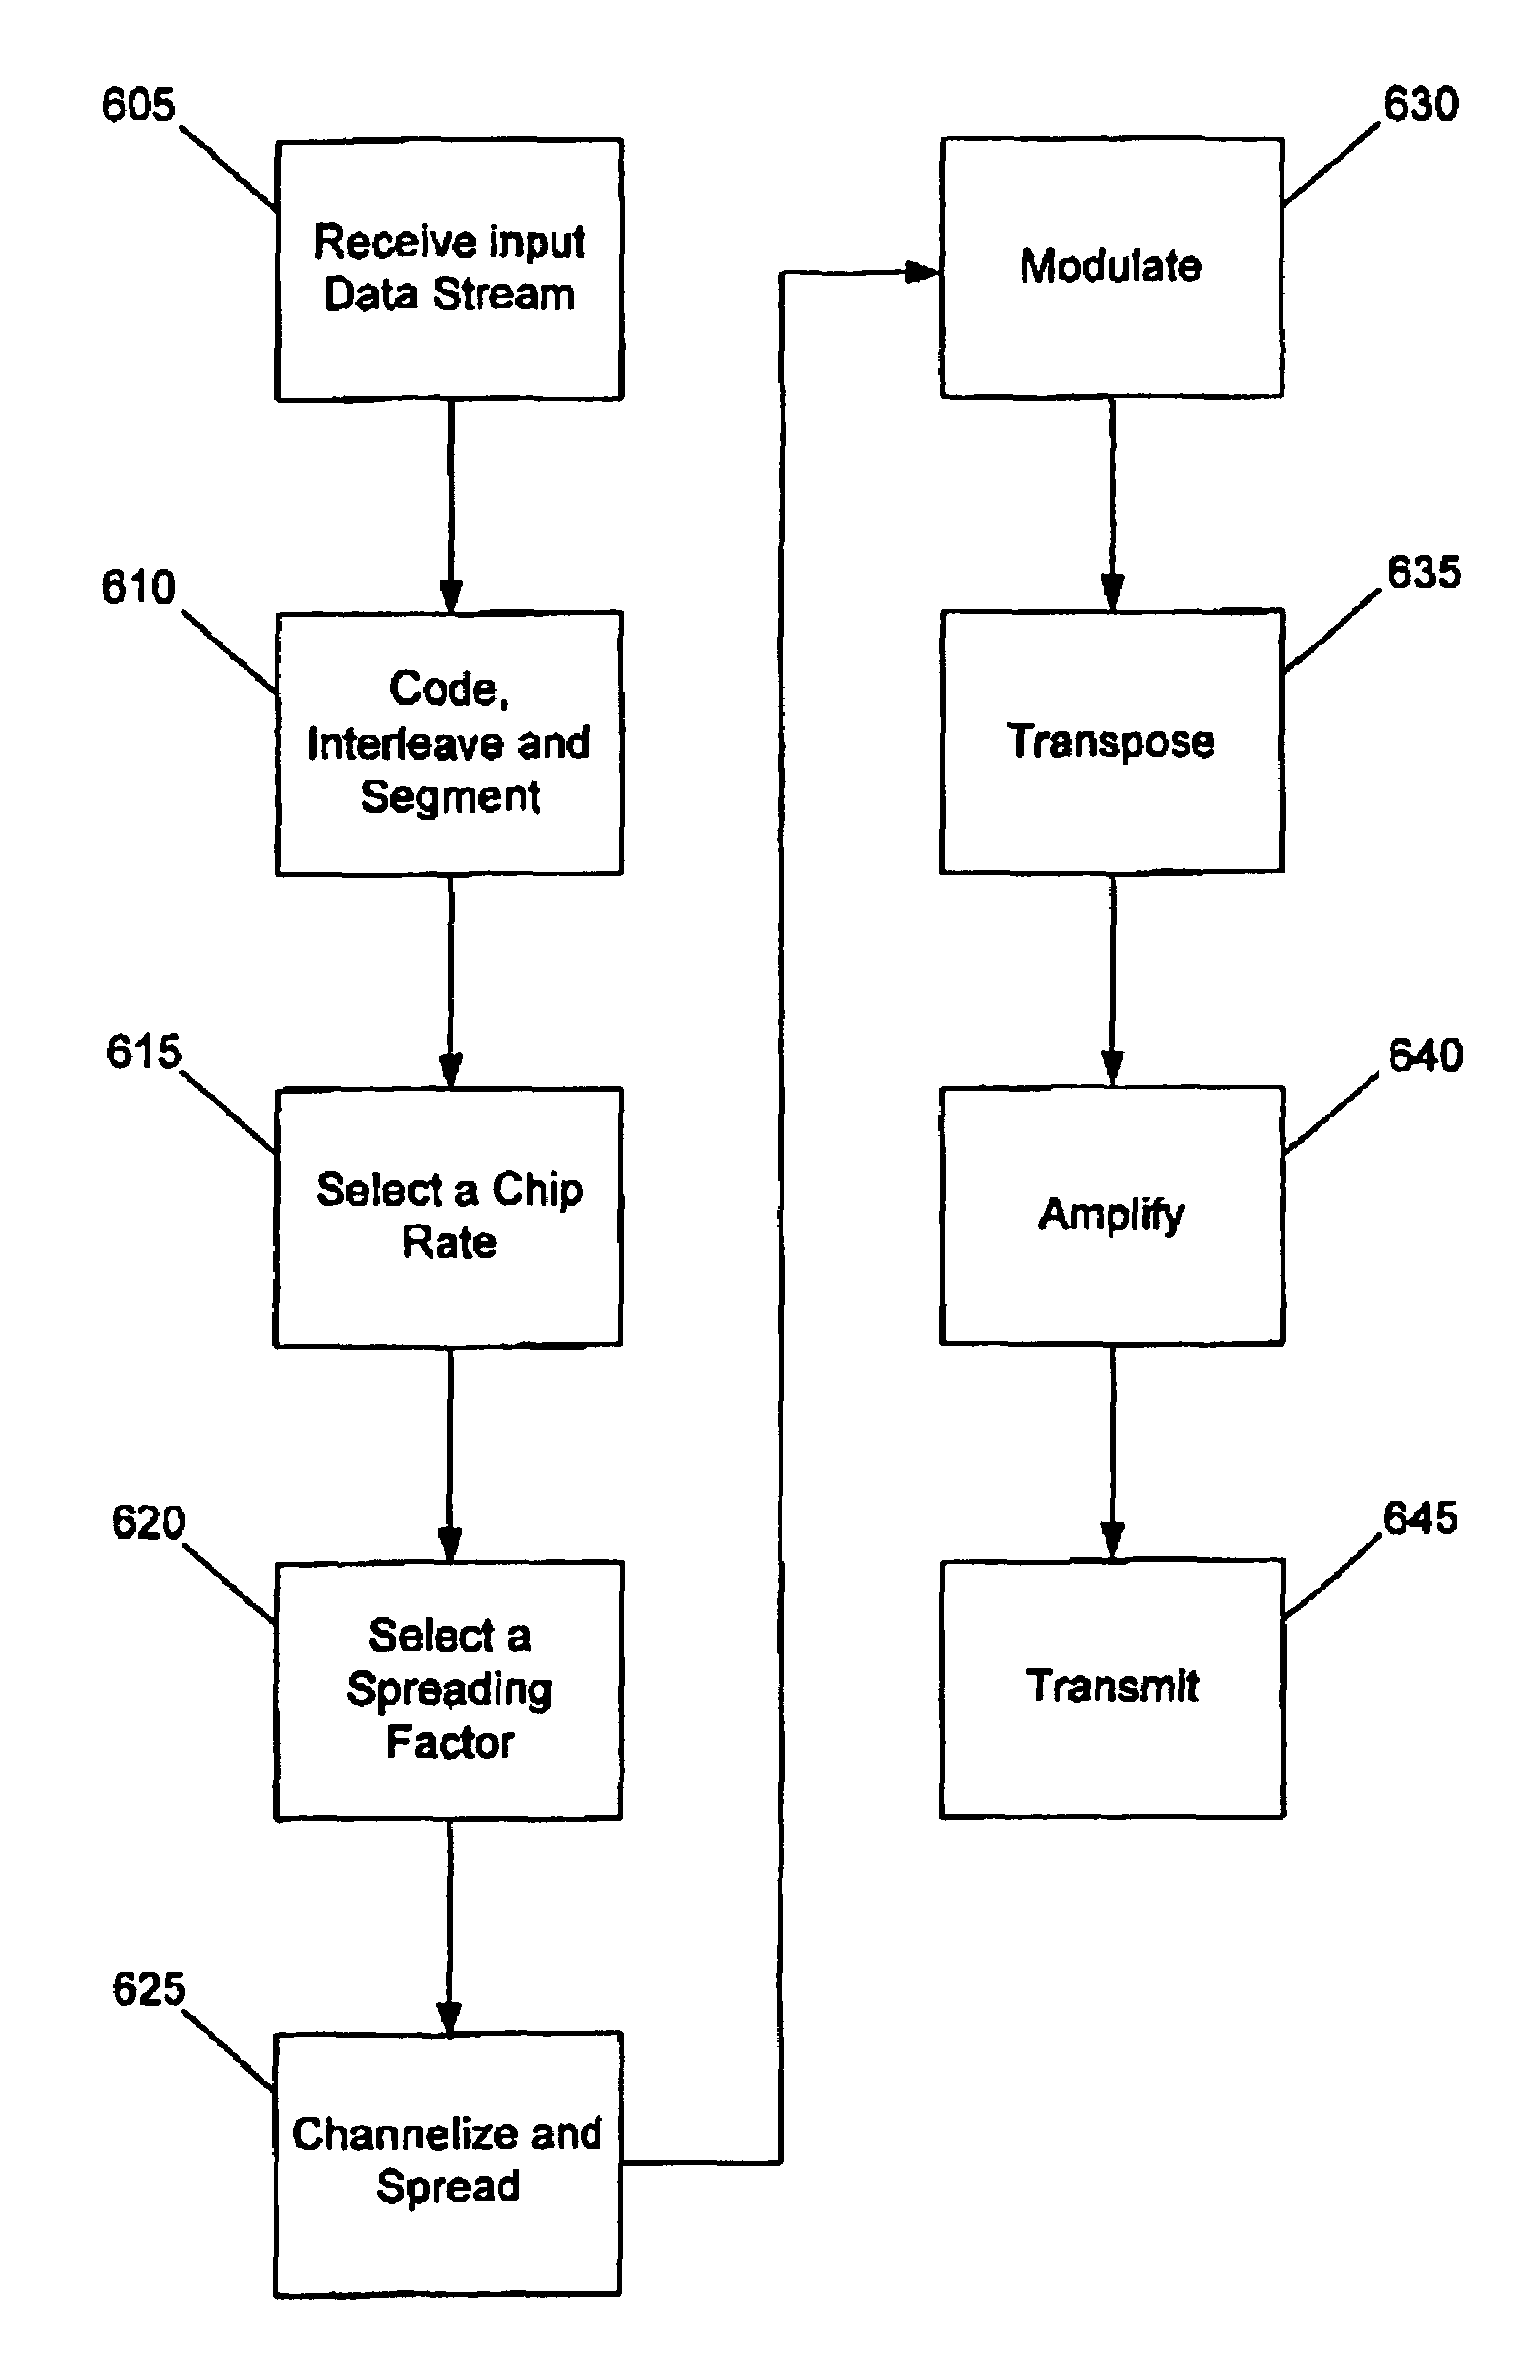 System and method for providing flexible data rate transmission in a telecommunication system